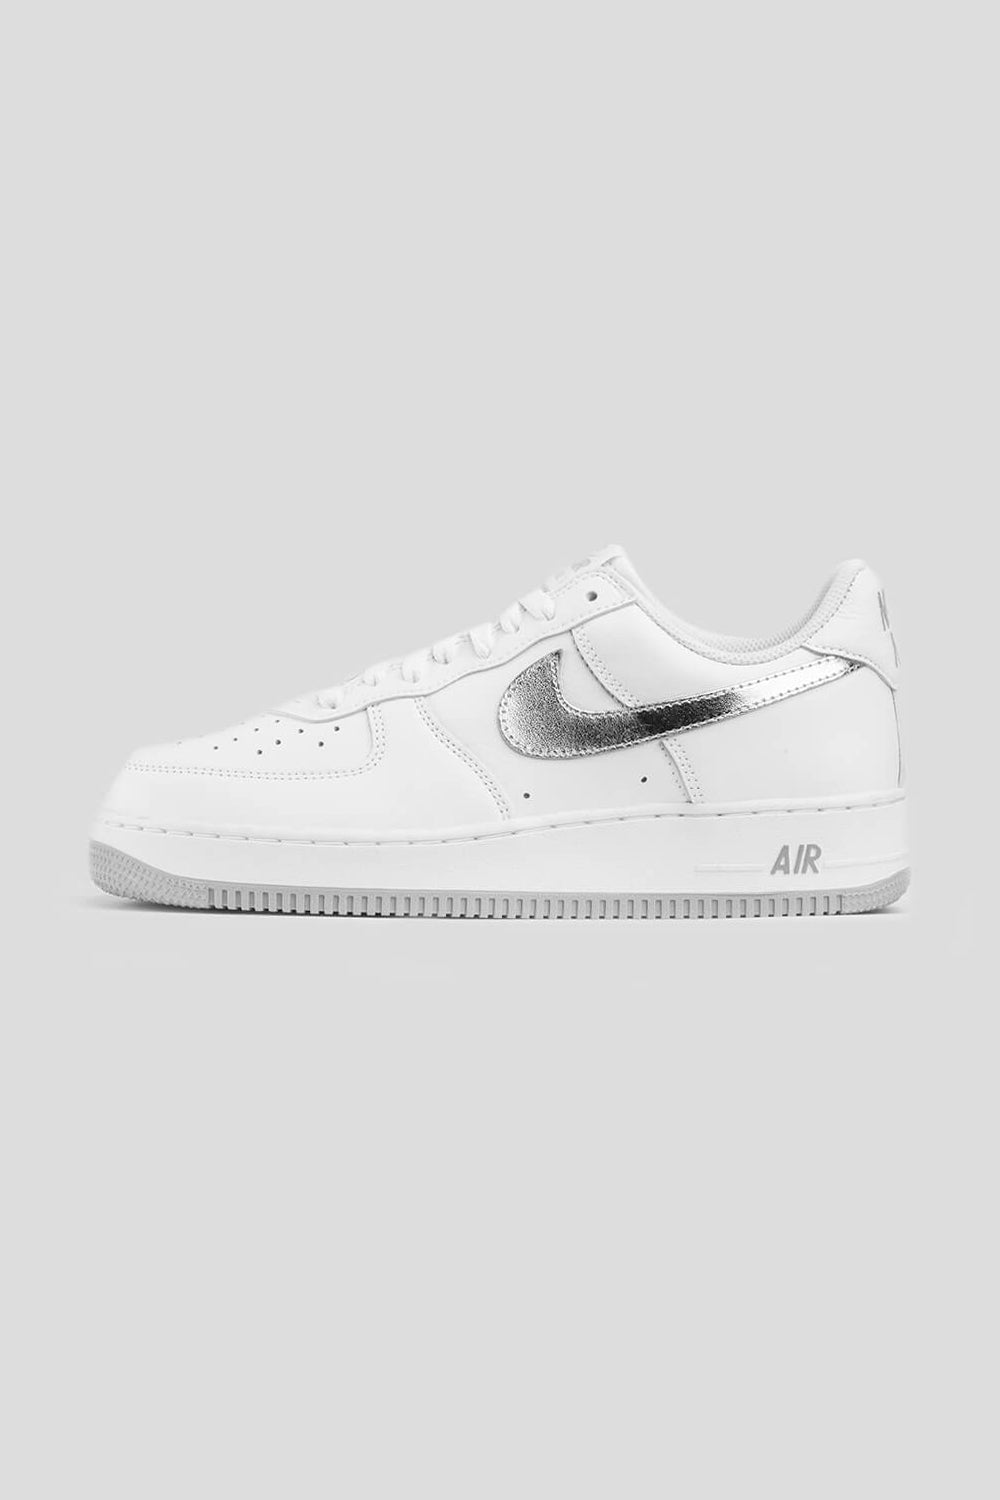 Air Force 1 Low Retro 'Silver Swoosh'